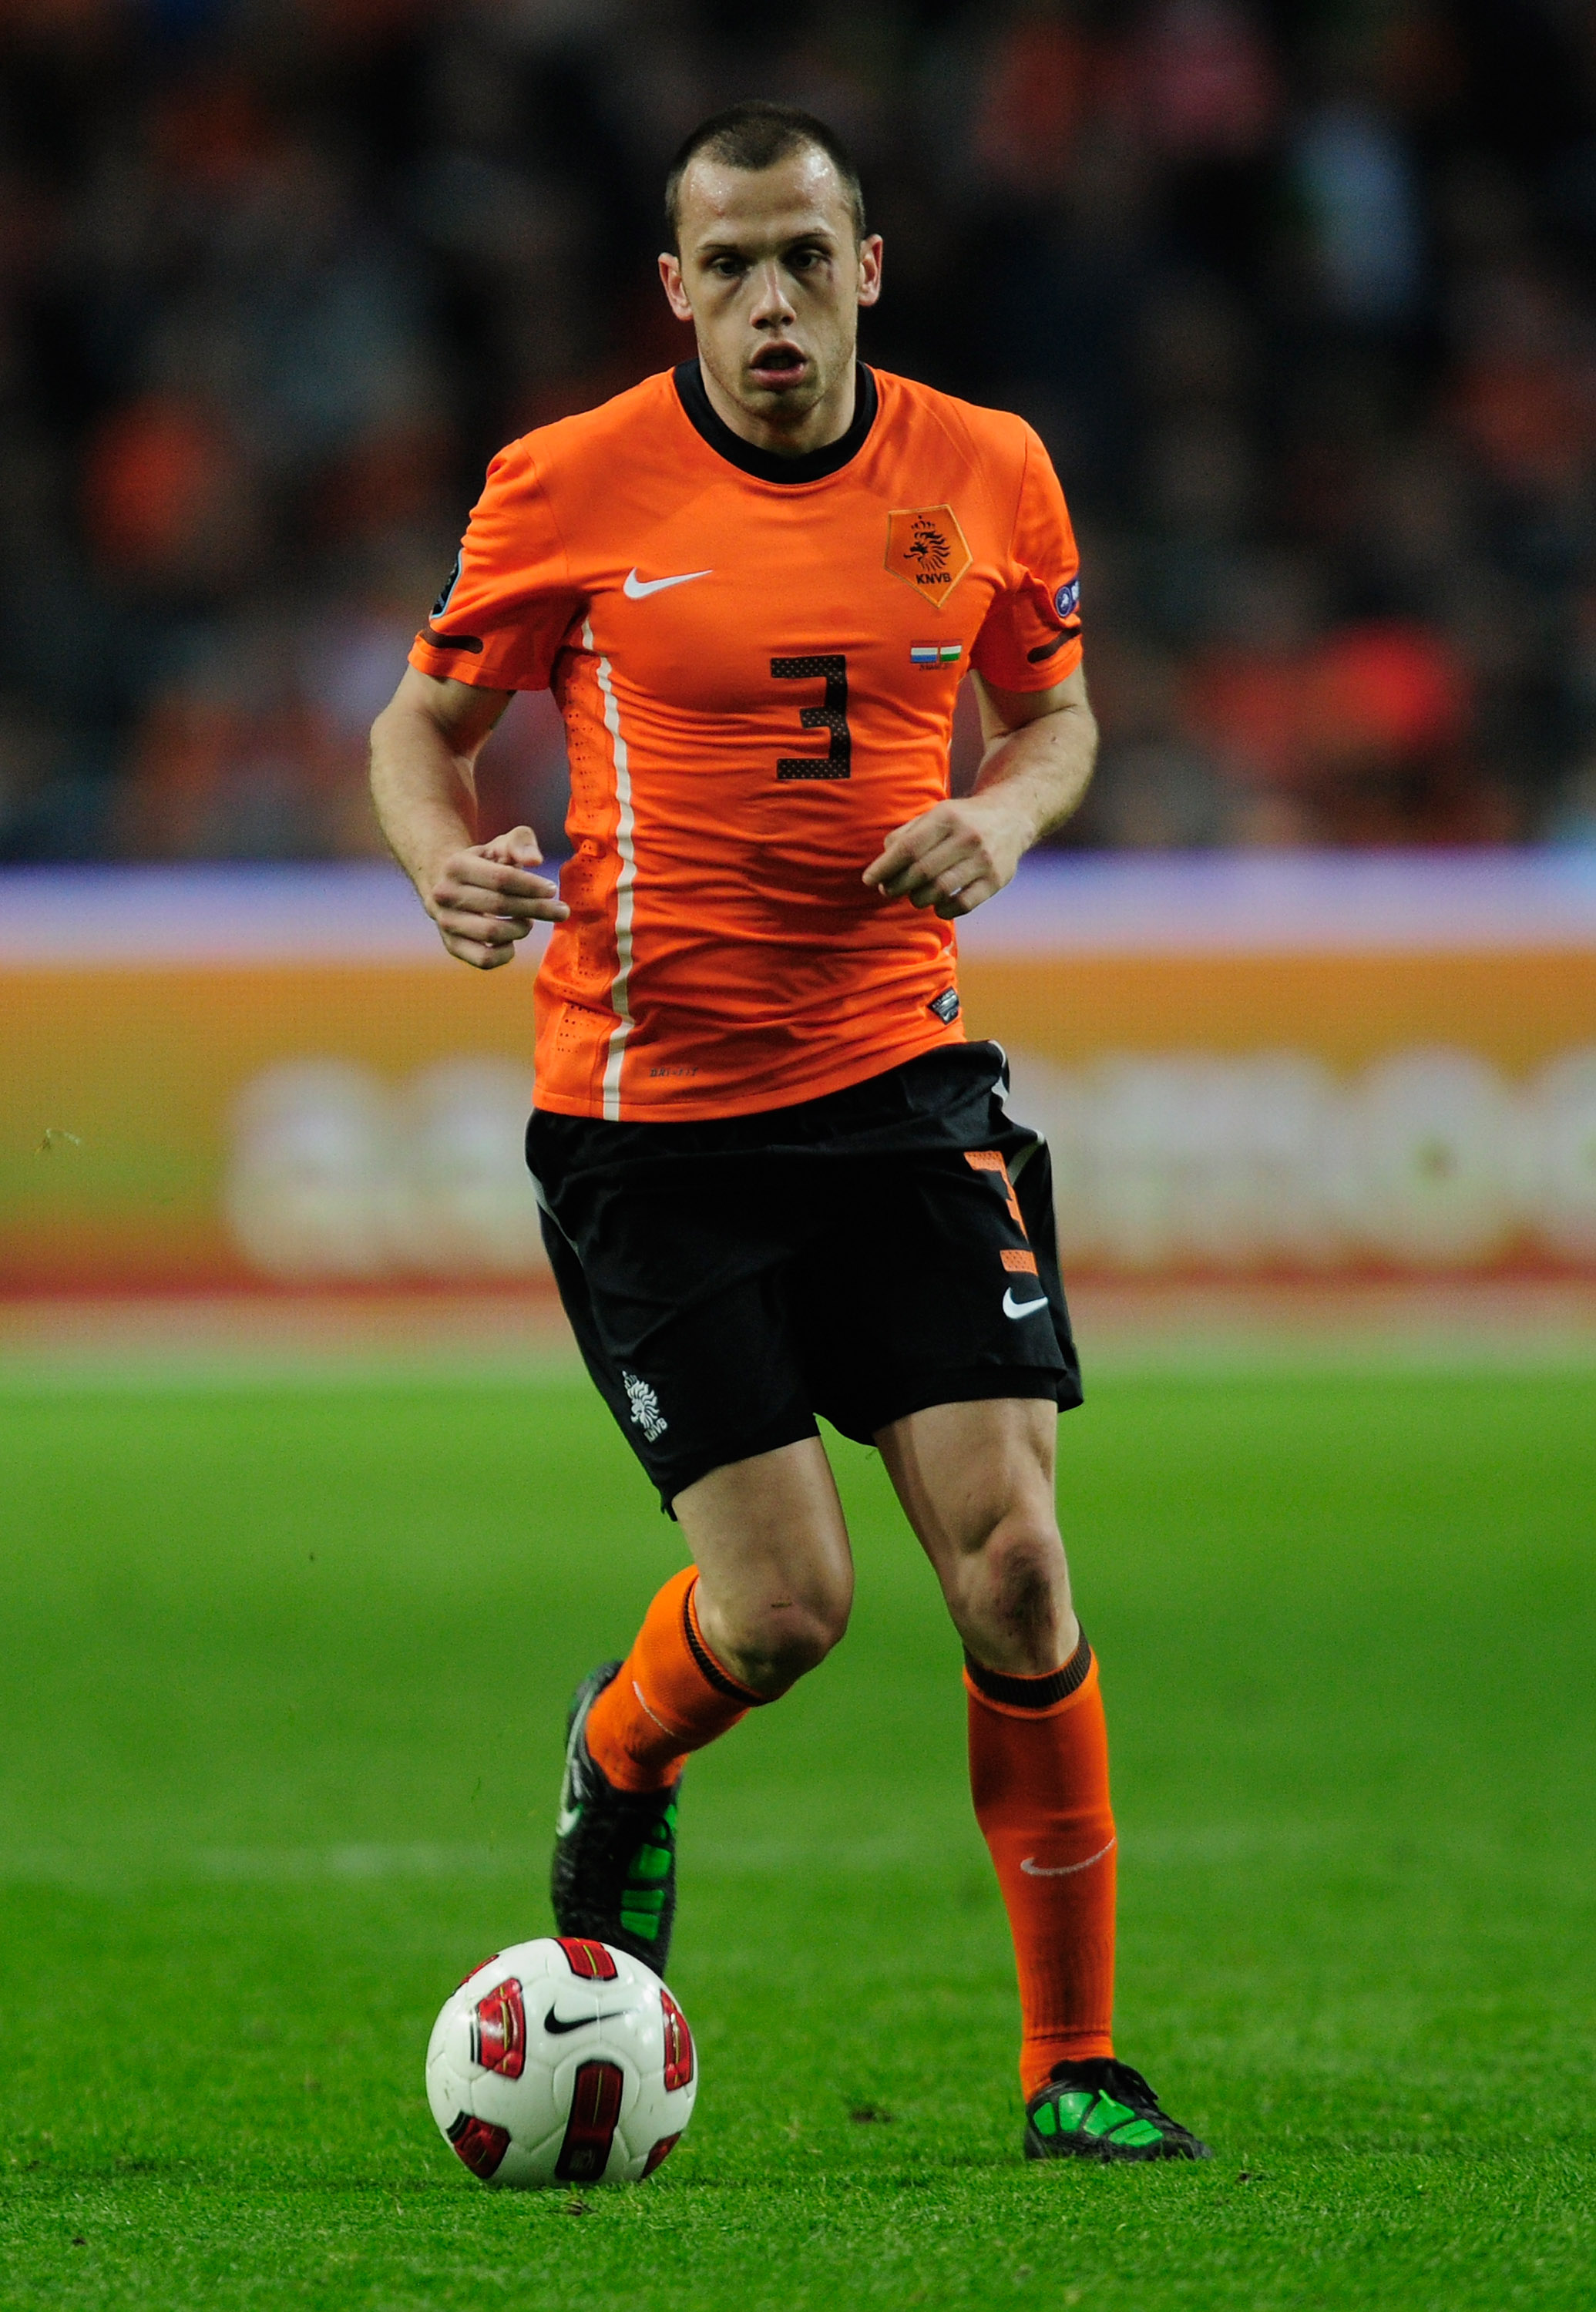 AMSTERDAM, NETHERLANDS - MARCH 29:  John Heitinga of the Netherlands in action during the Group E, EURO 2012 Qualifier between Netherlands and Hungary at the Amsterdam Arena on March 29, 2011 in Amsterdam, Netherlands.  (Photo by Jamie McDonald/Getty Imag